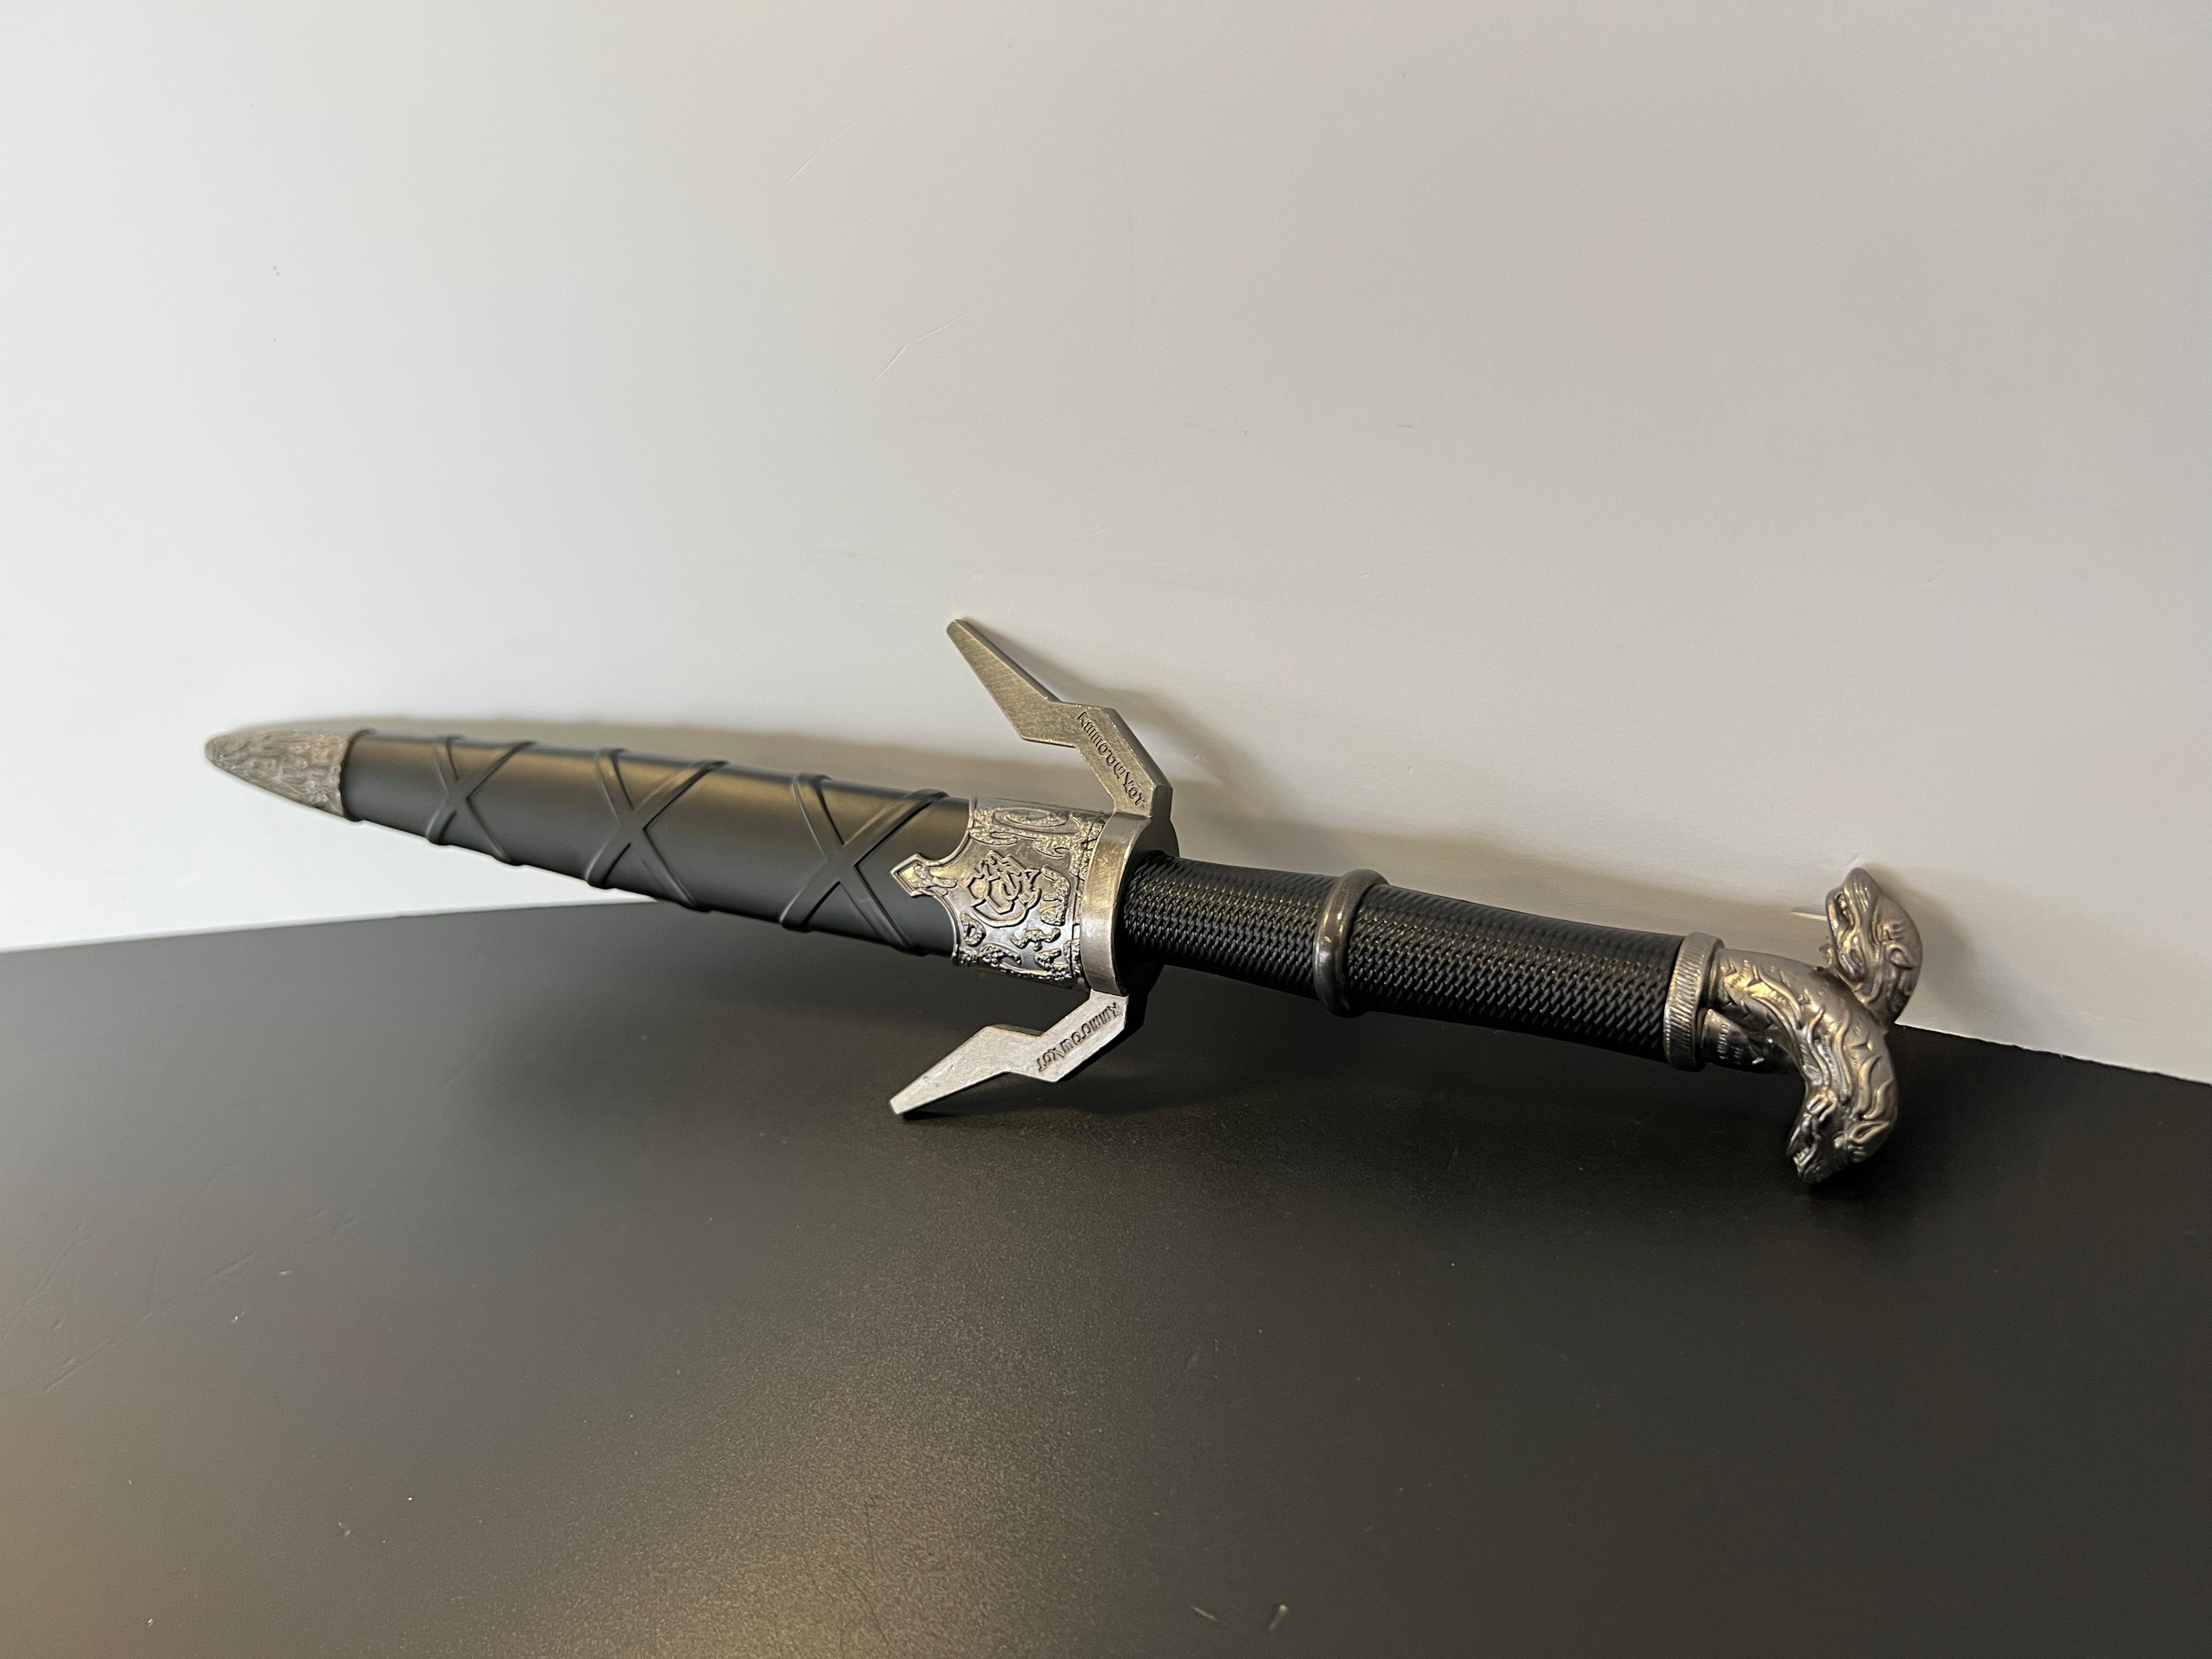 Geralt of Rivia two-handed sword dagger - The Witcher